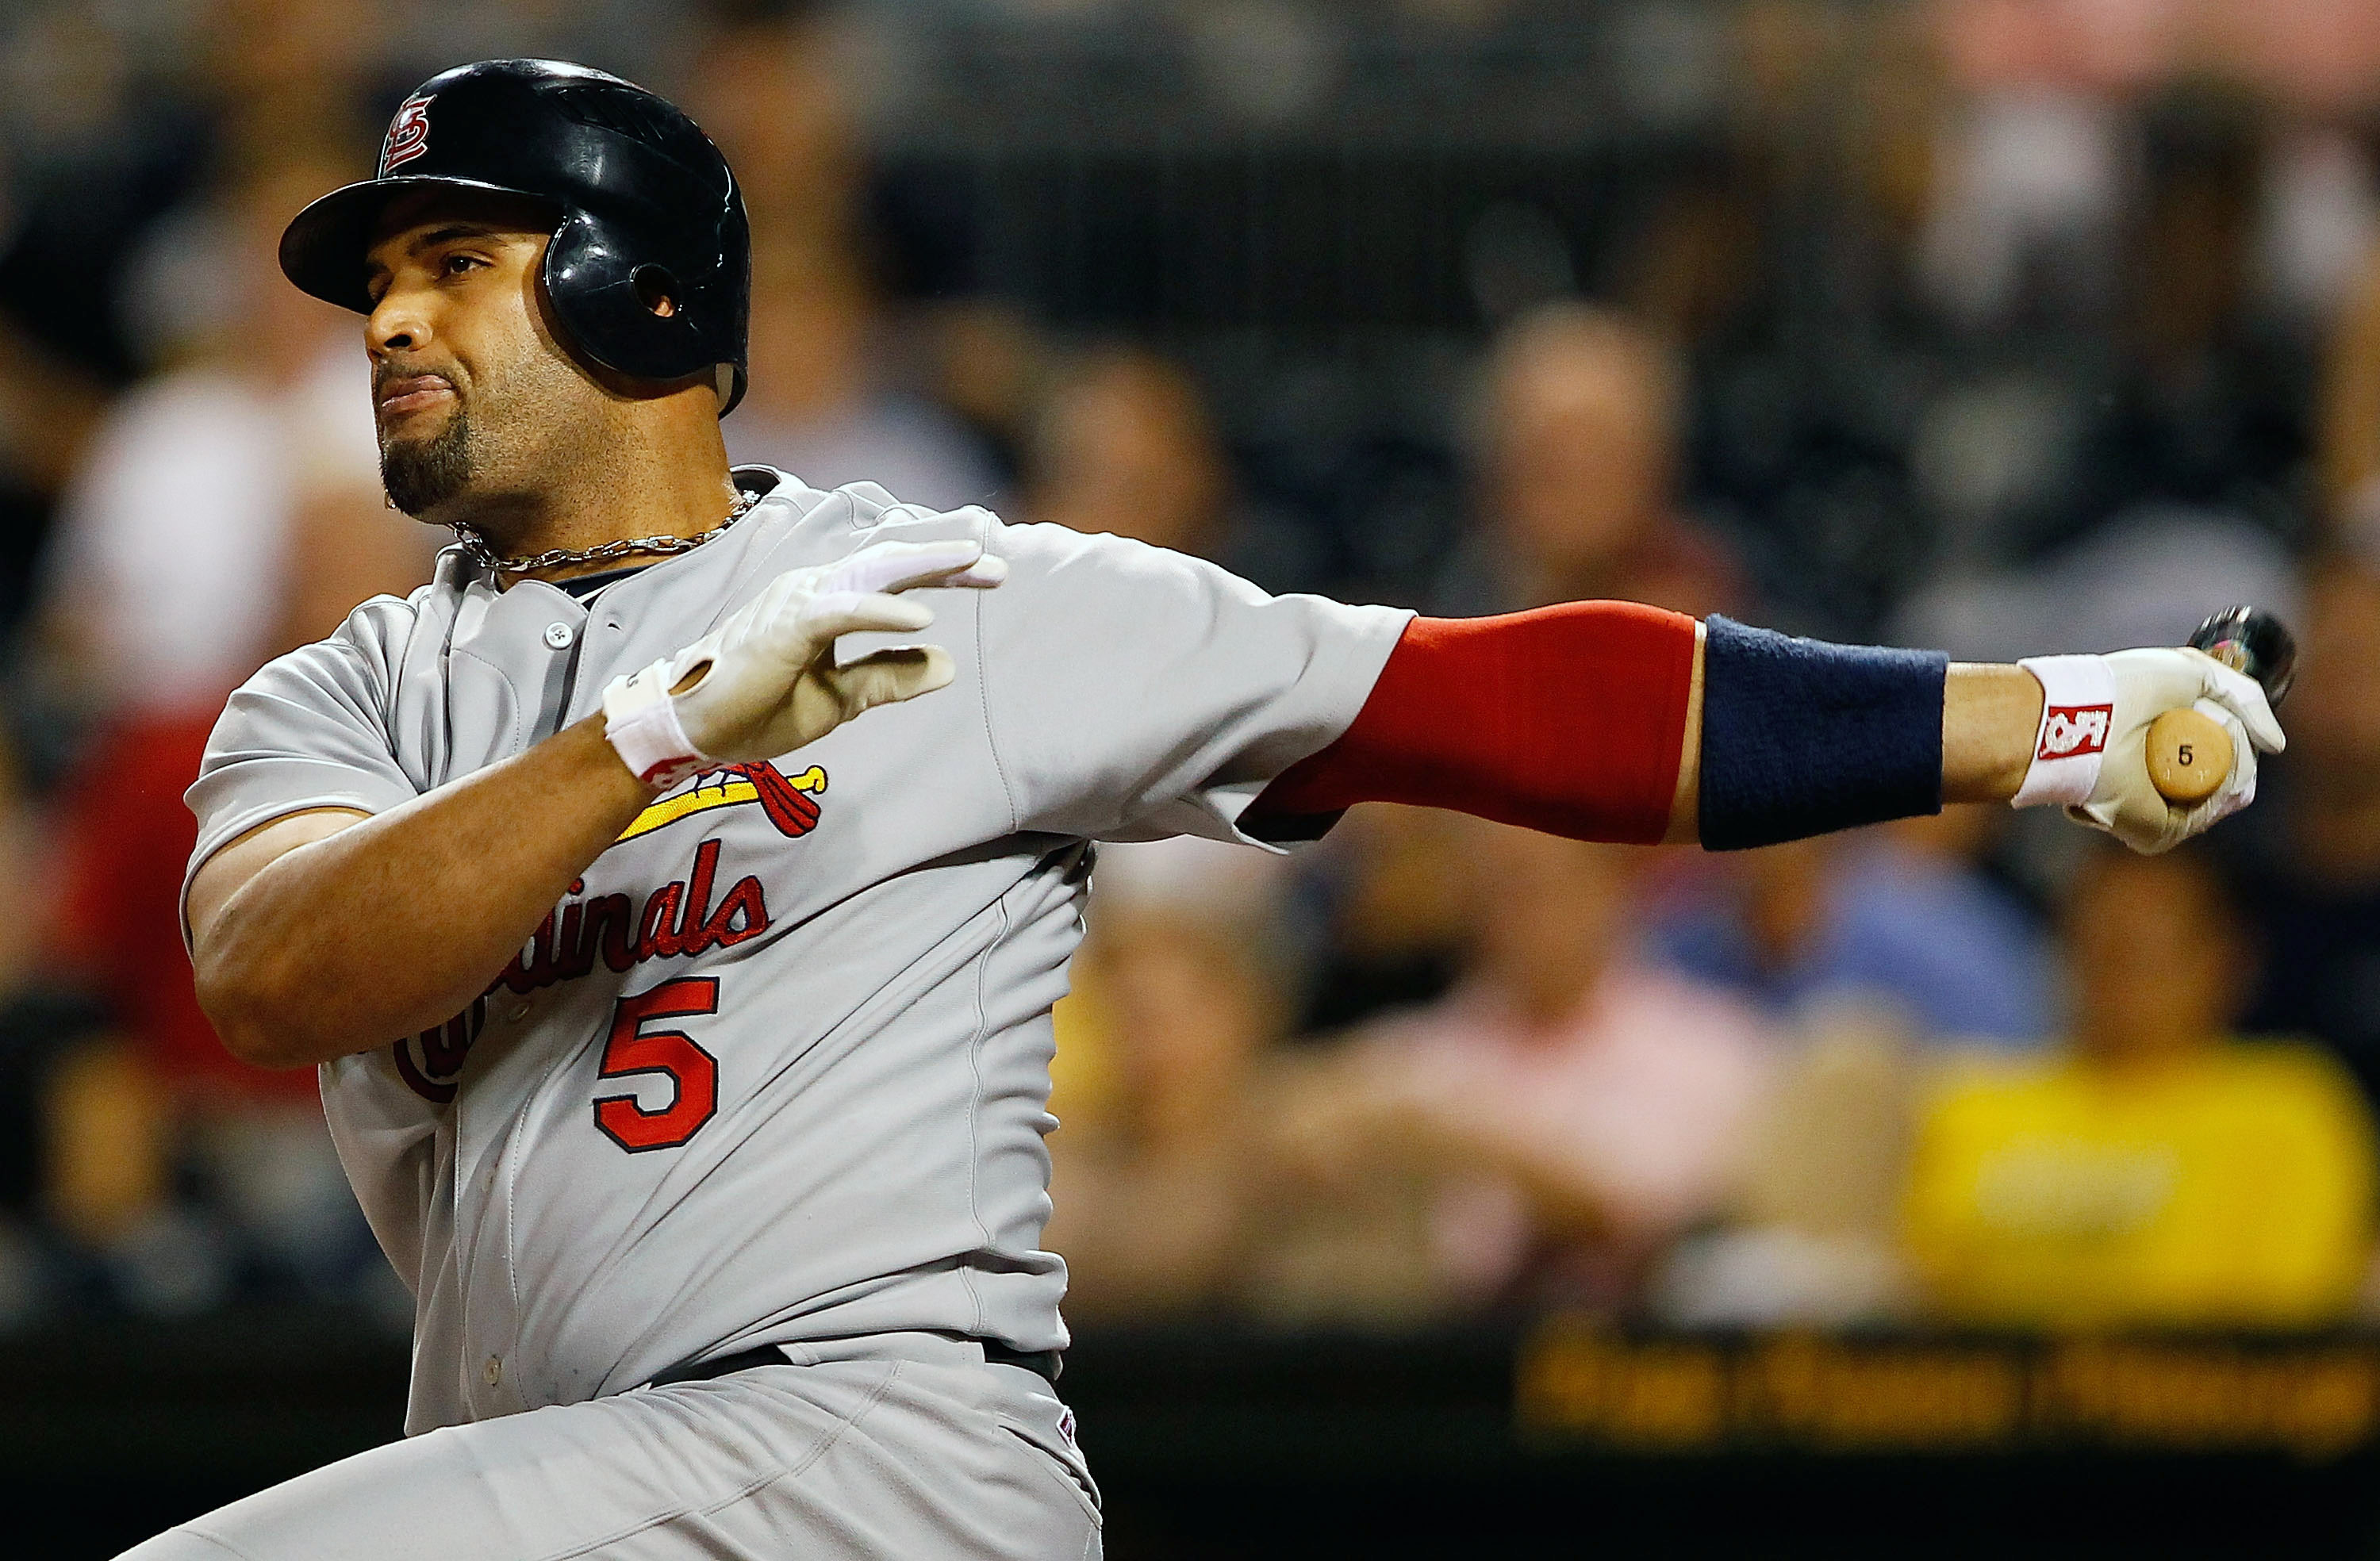 Albert Pujols 10 Reasons He Should Stay With the St. Louis Cardinals